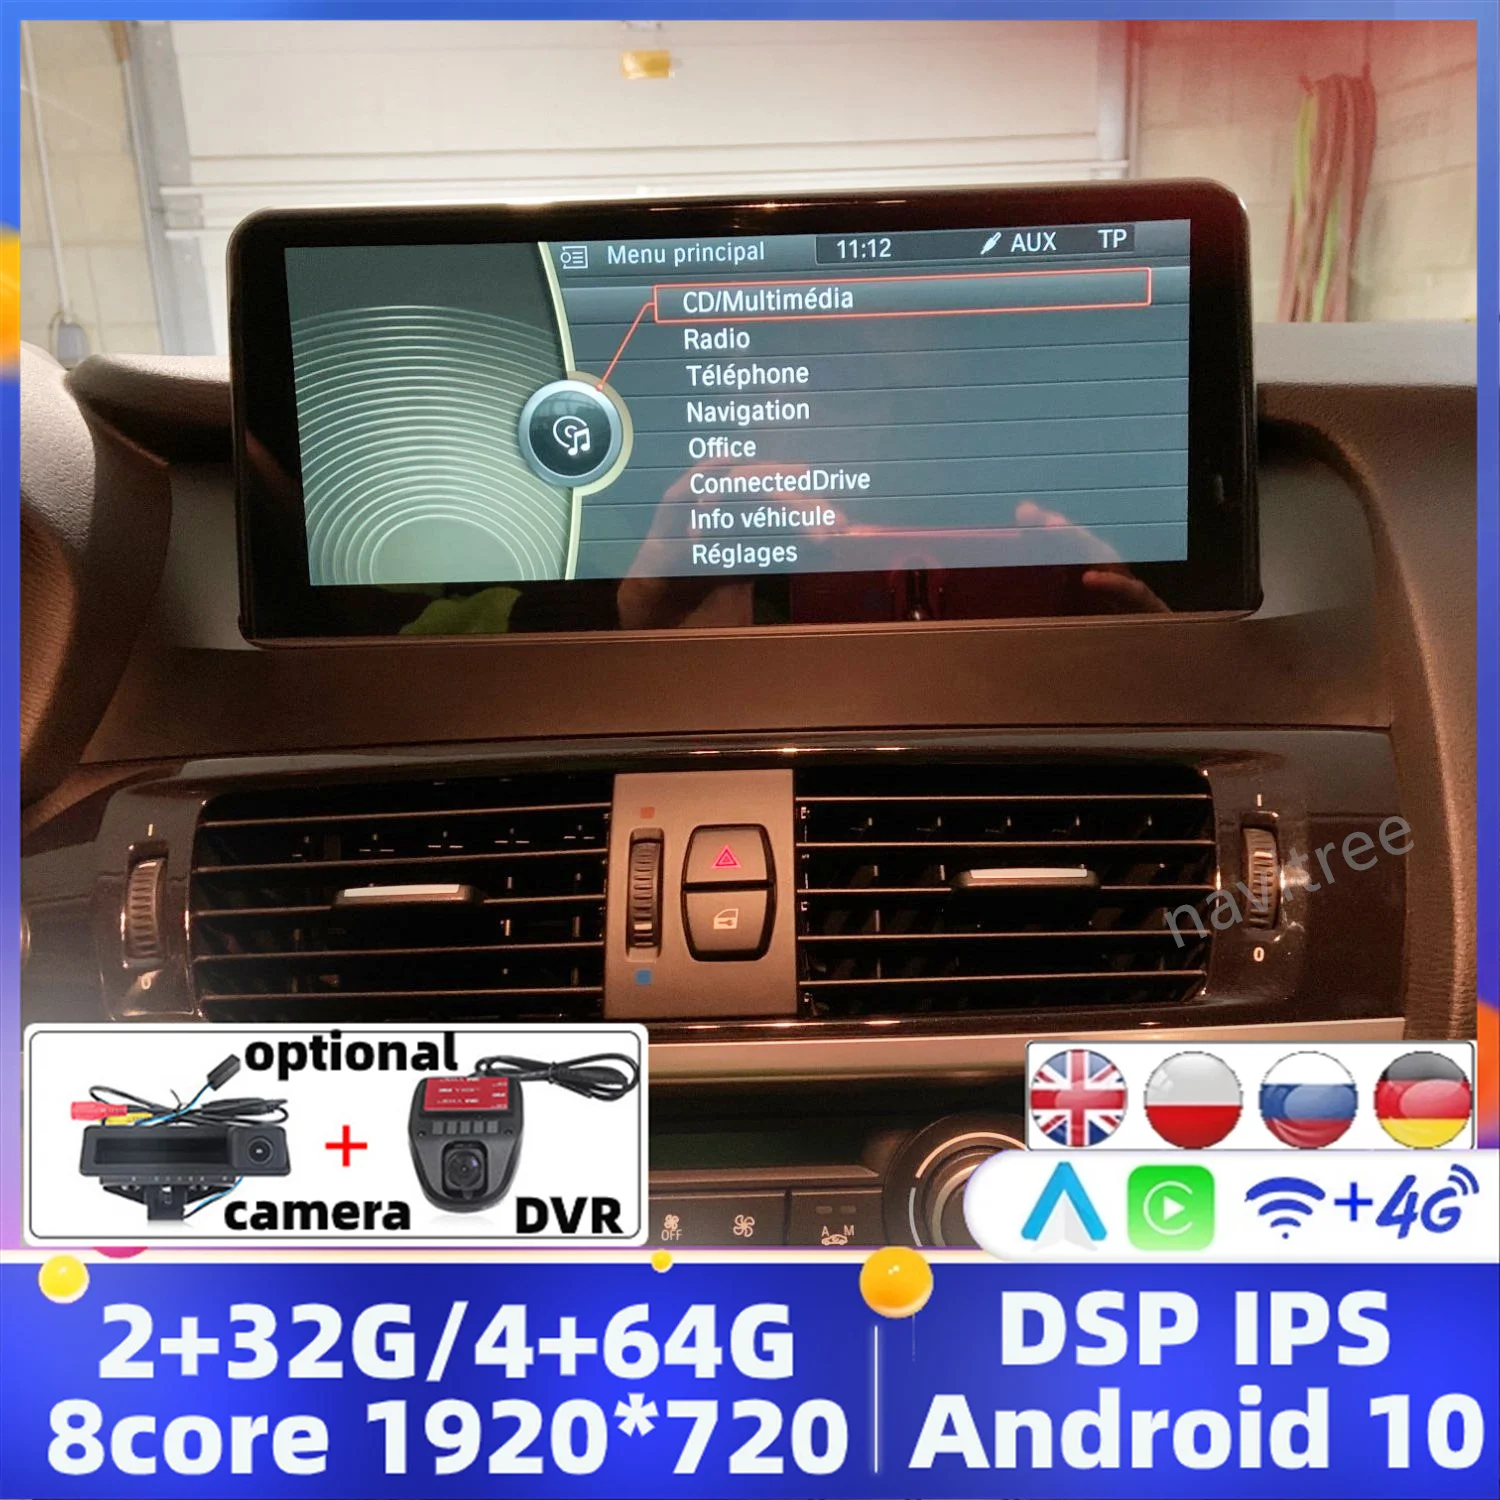 

4GB Android Car Multimedia GPS Player For BMW X3 F25/X4 F26 2011-2017 ID7 10.25 Inch IPS Screen 4G LTE Support Carplay SWC DSP